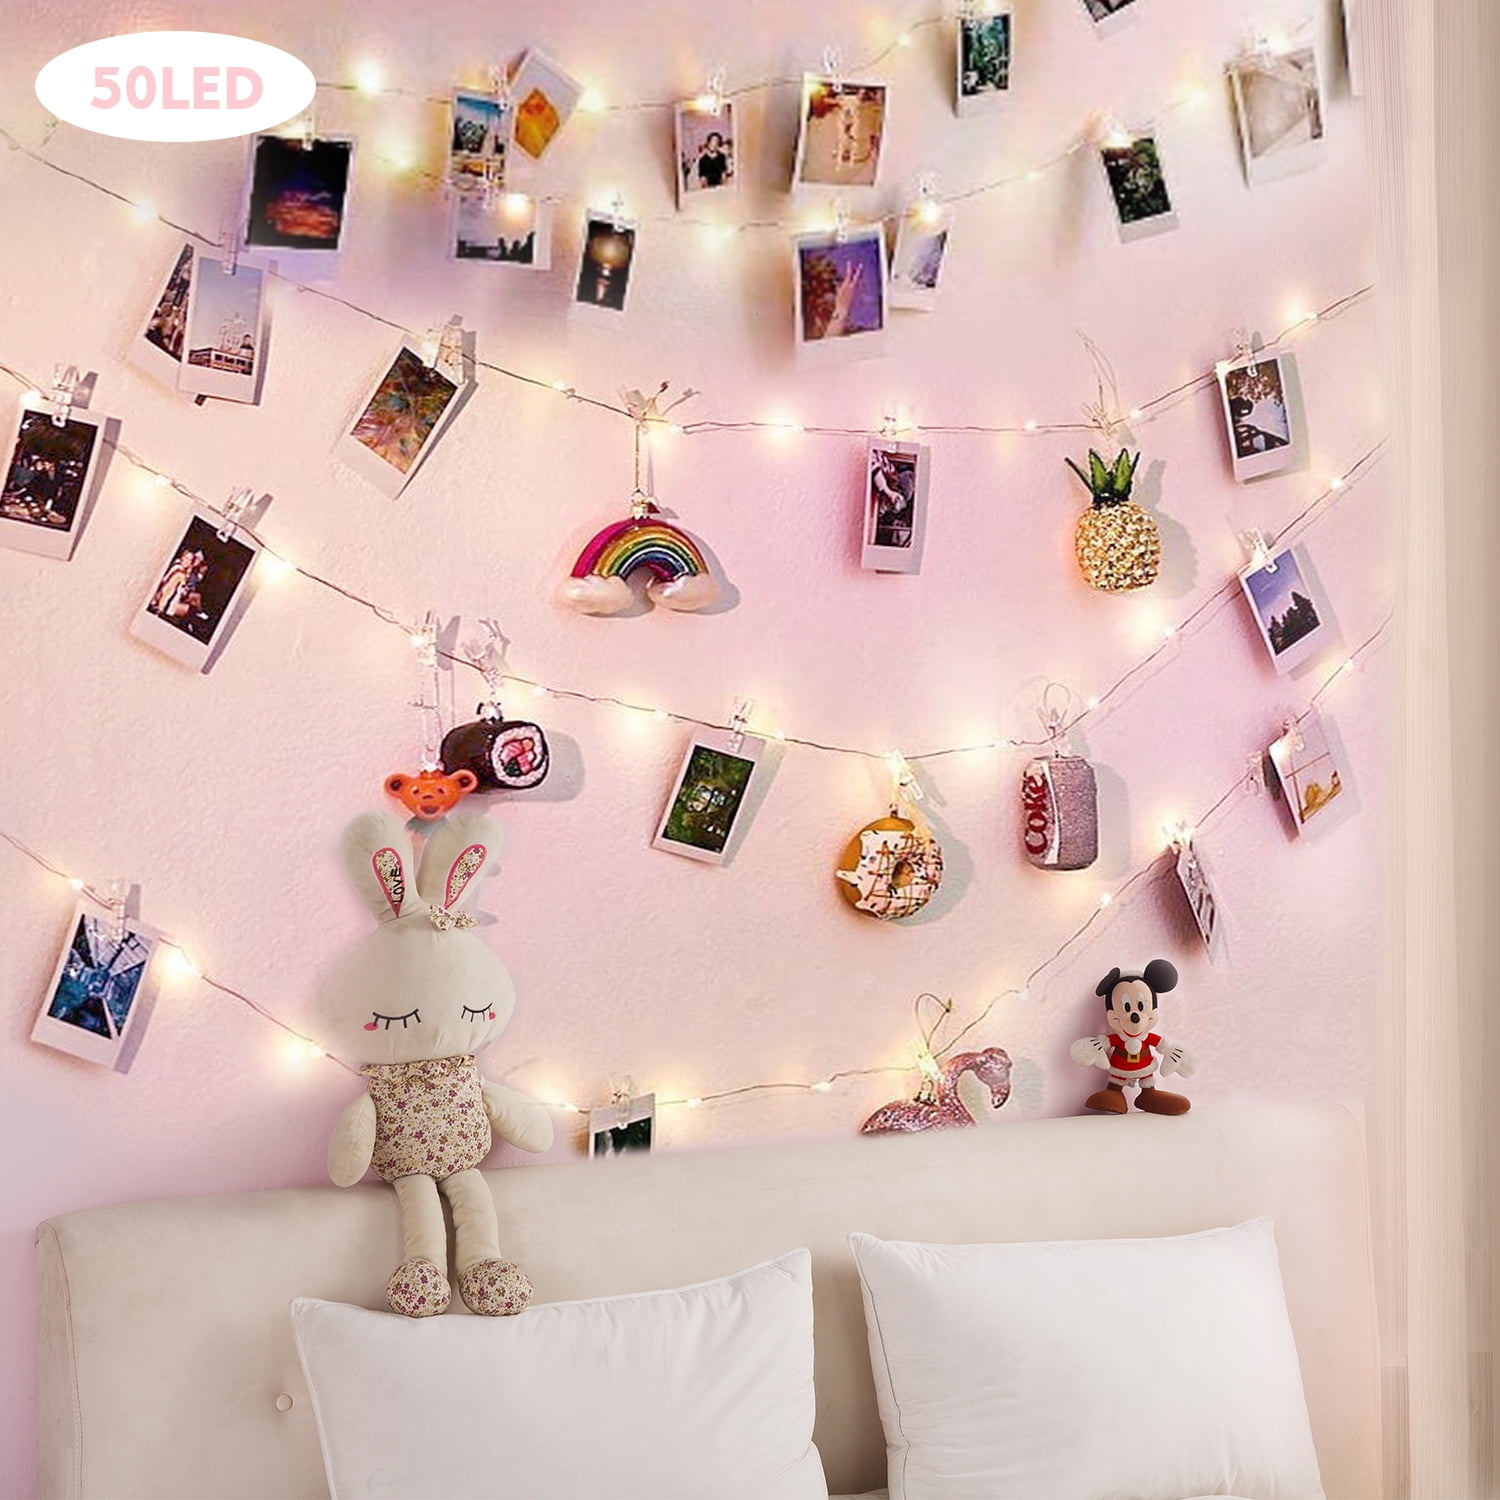 10M Photo Clip 100-Led String Fairy Lights Battery Party Christmas for Home Room 